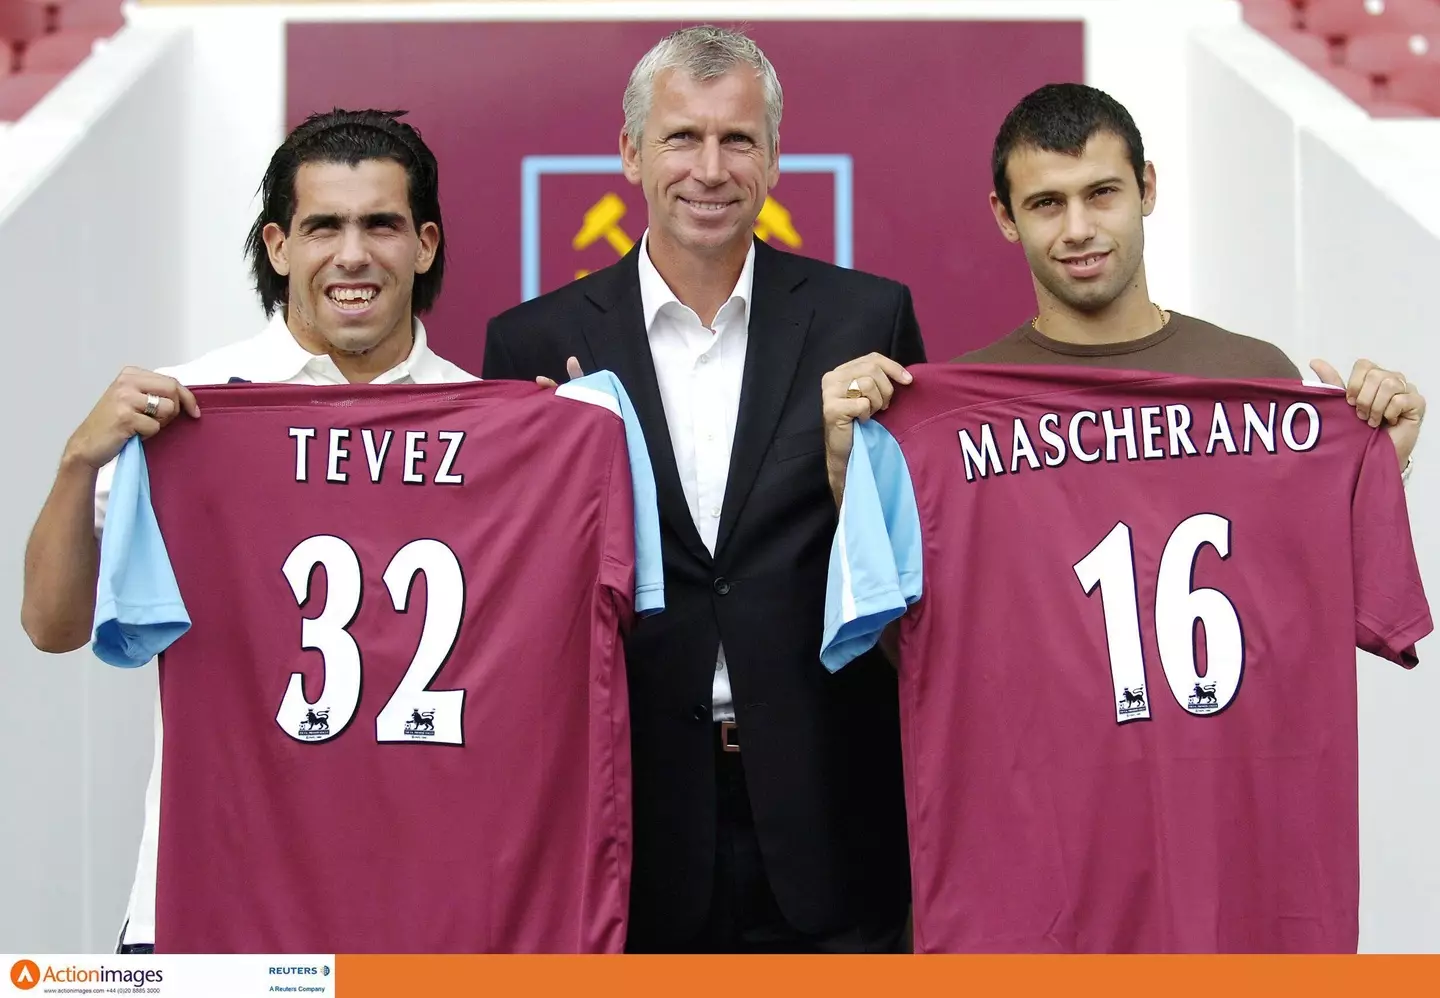 Tevez and Mascherano's deals saw an end to third party ownership in England. Image: PA Images